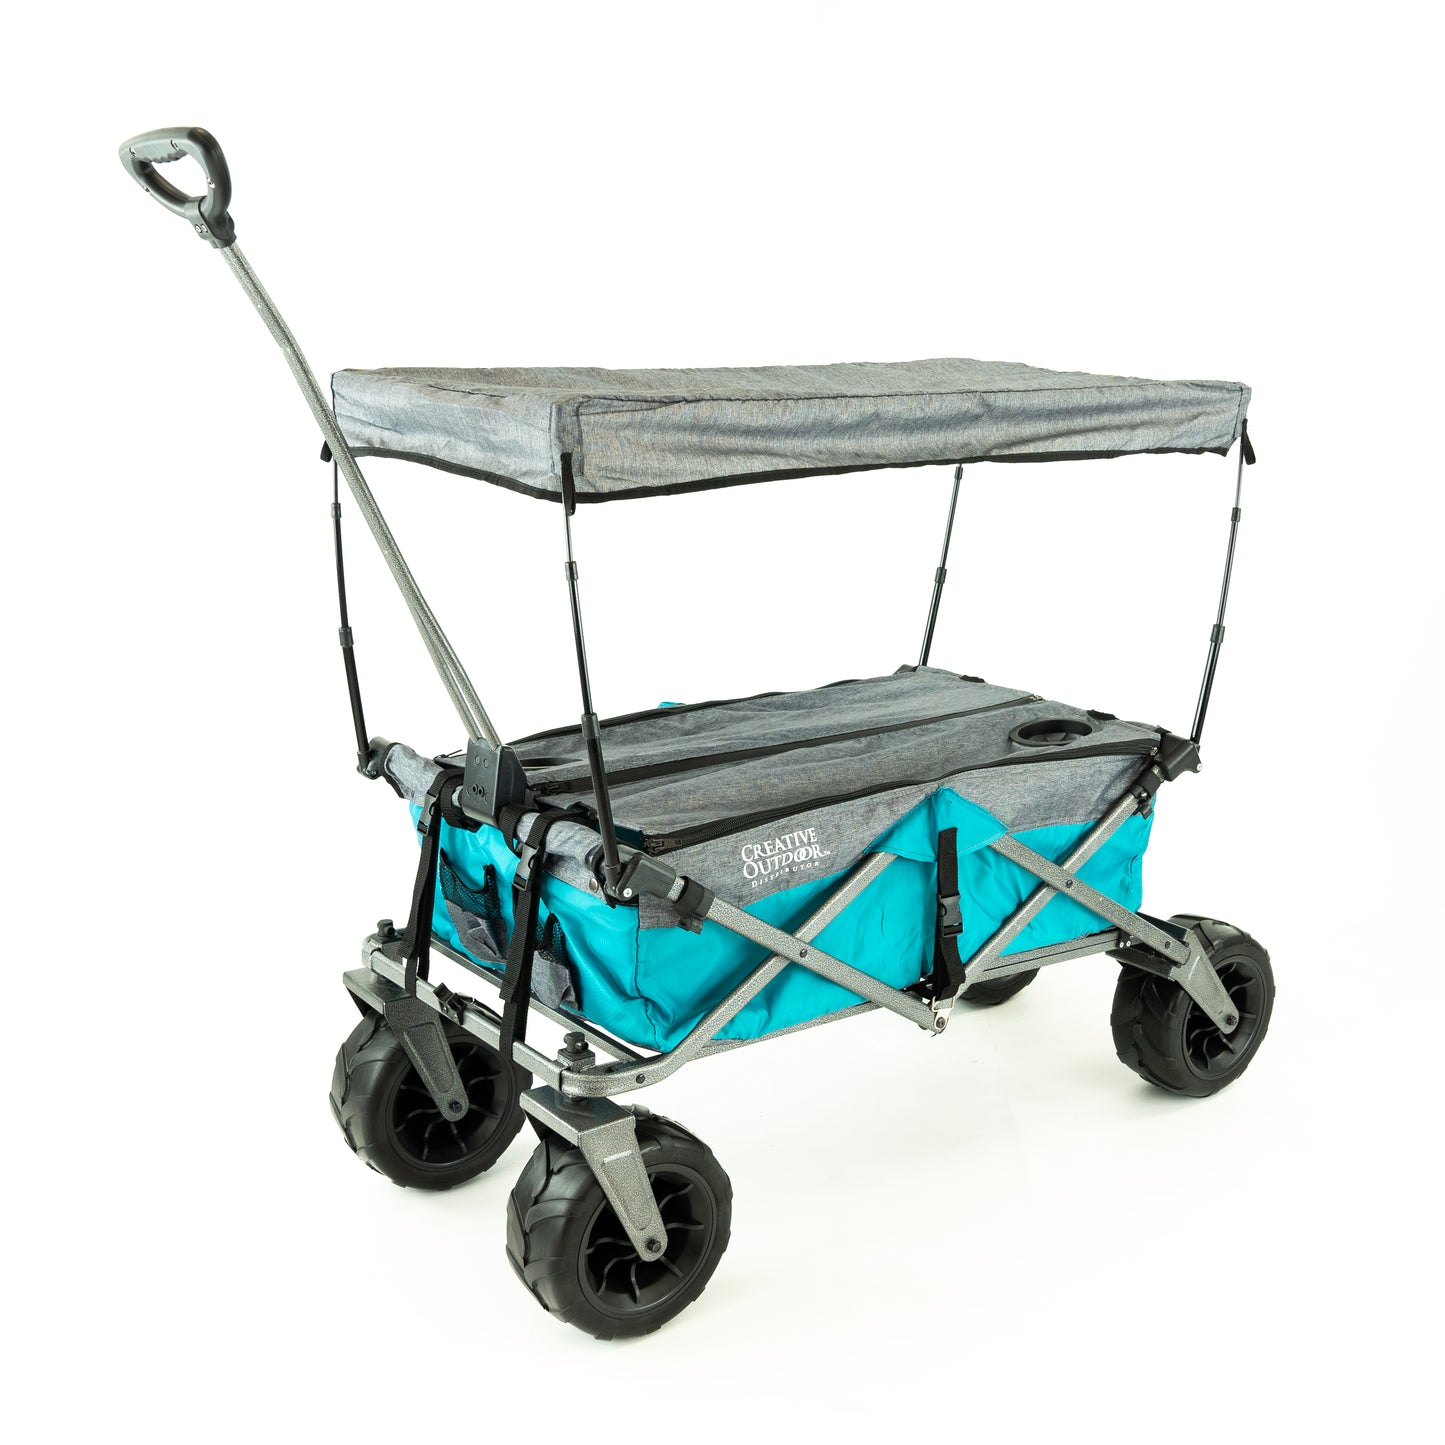 1 Teal/Gray XXL Hauler Deluxe Wagon with Cooler Rack + 1 Teal Retro Legacy Cooler - Custom Folding Wagons